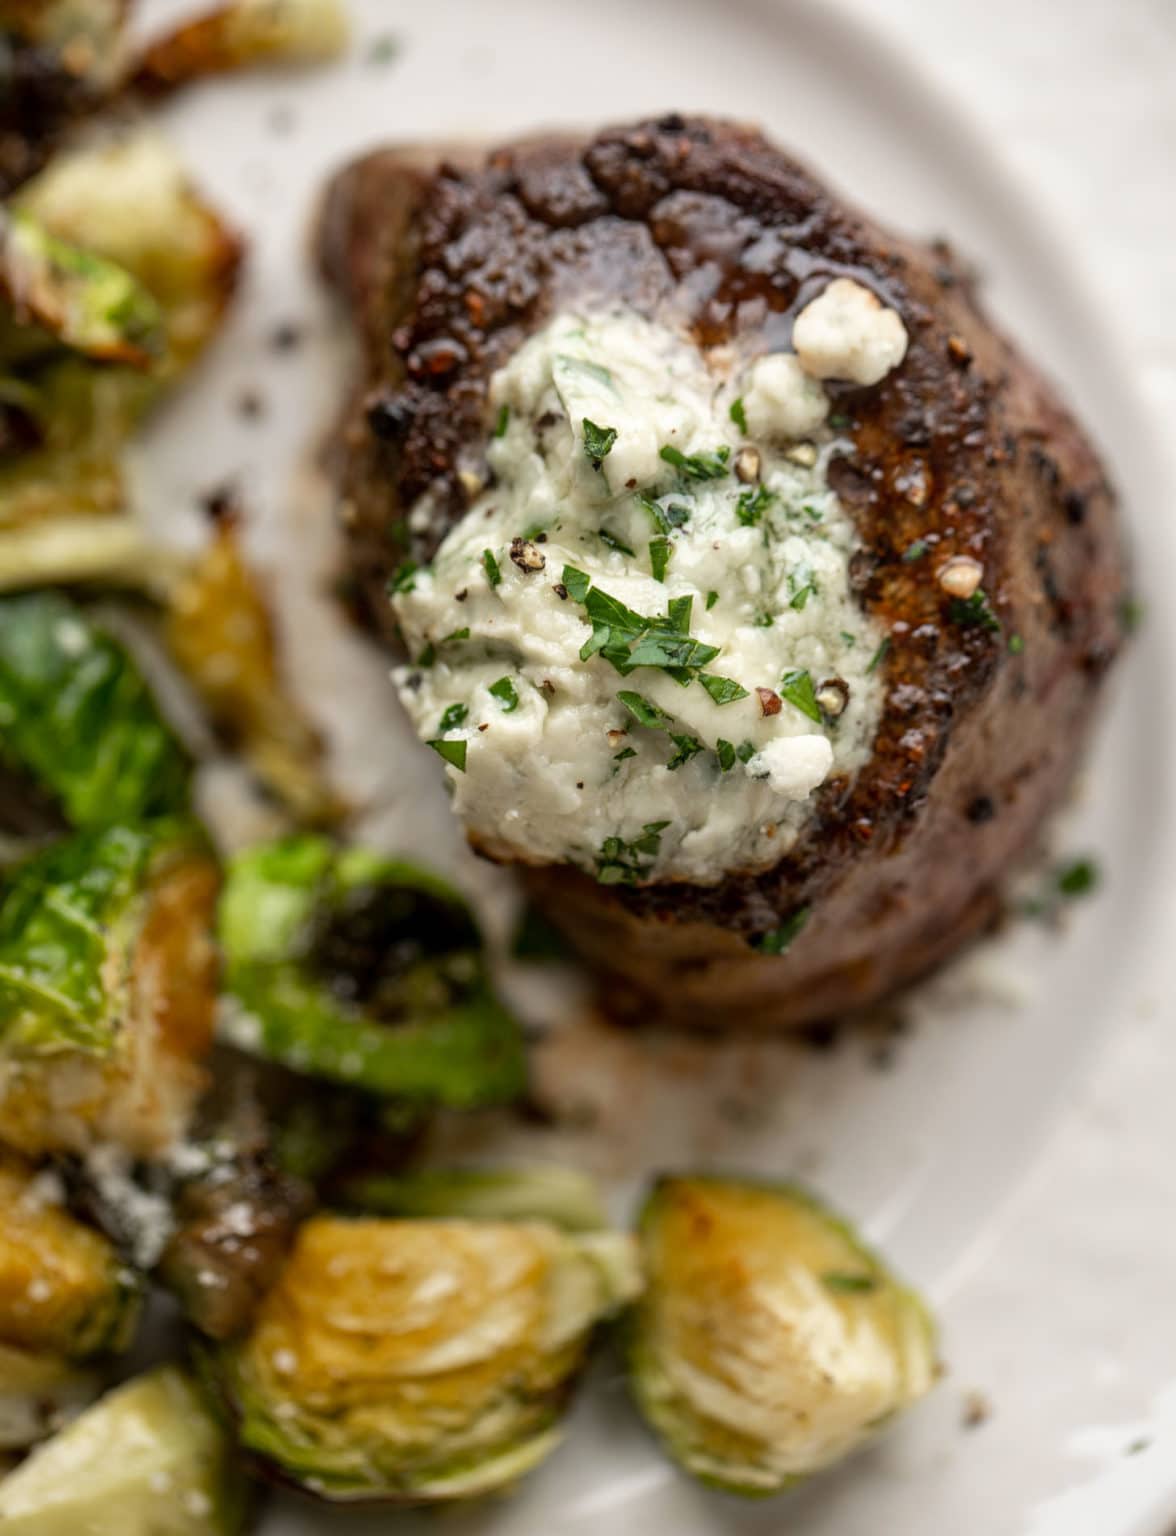 Best Filet Mignon Seared Filet Mignon with Blue Cheese Butter